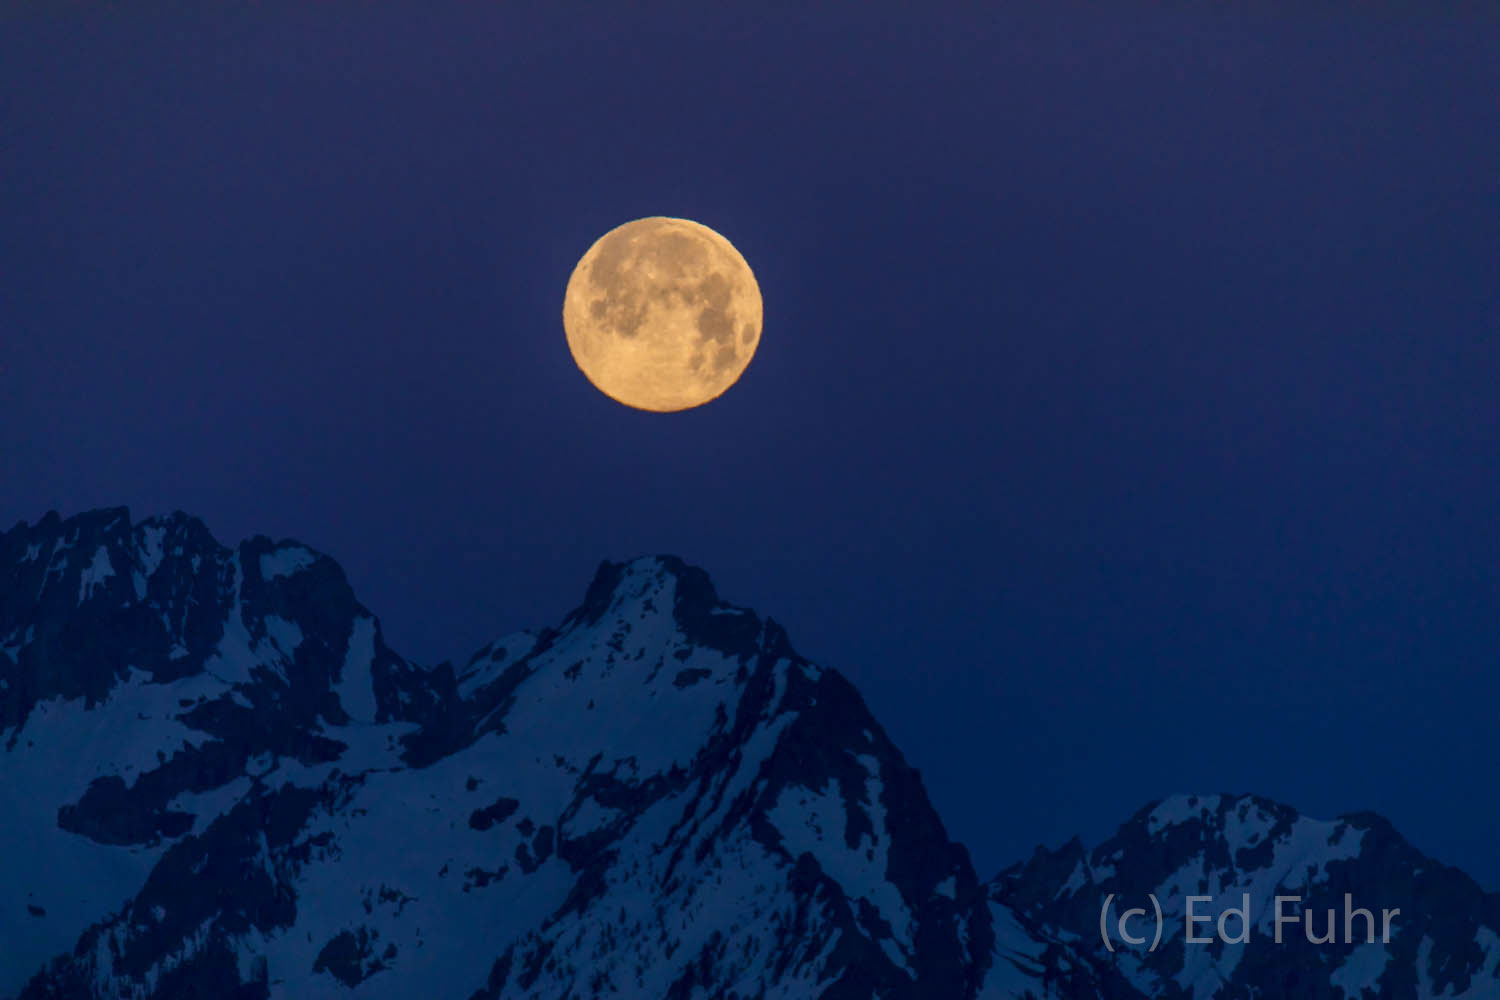 Before dawn, a blue moon prepares to set over the Tetons.  There is just a hint of light in the sky, dawn is still an hour away...